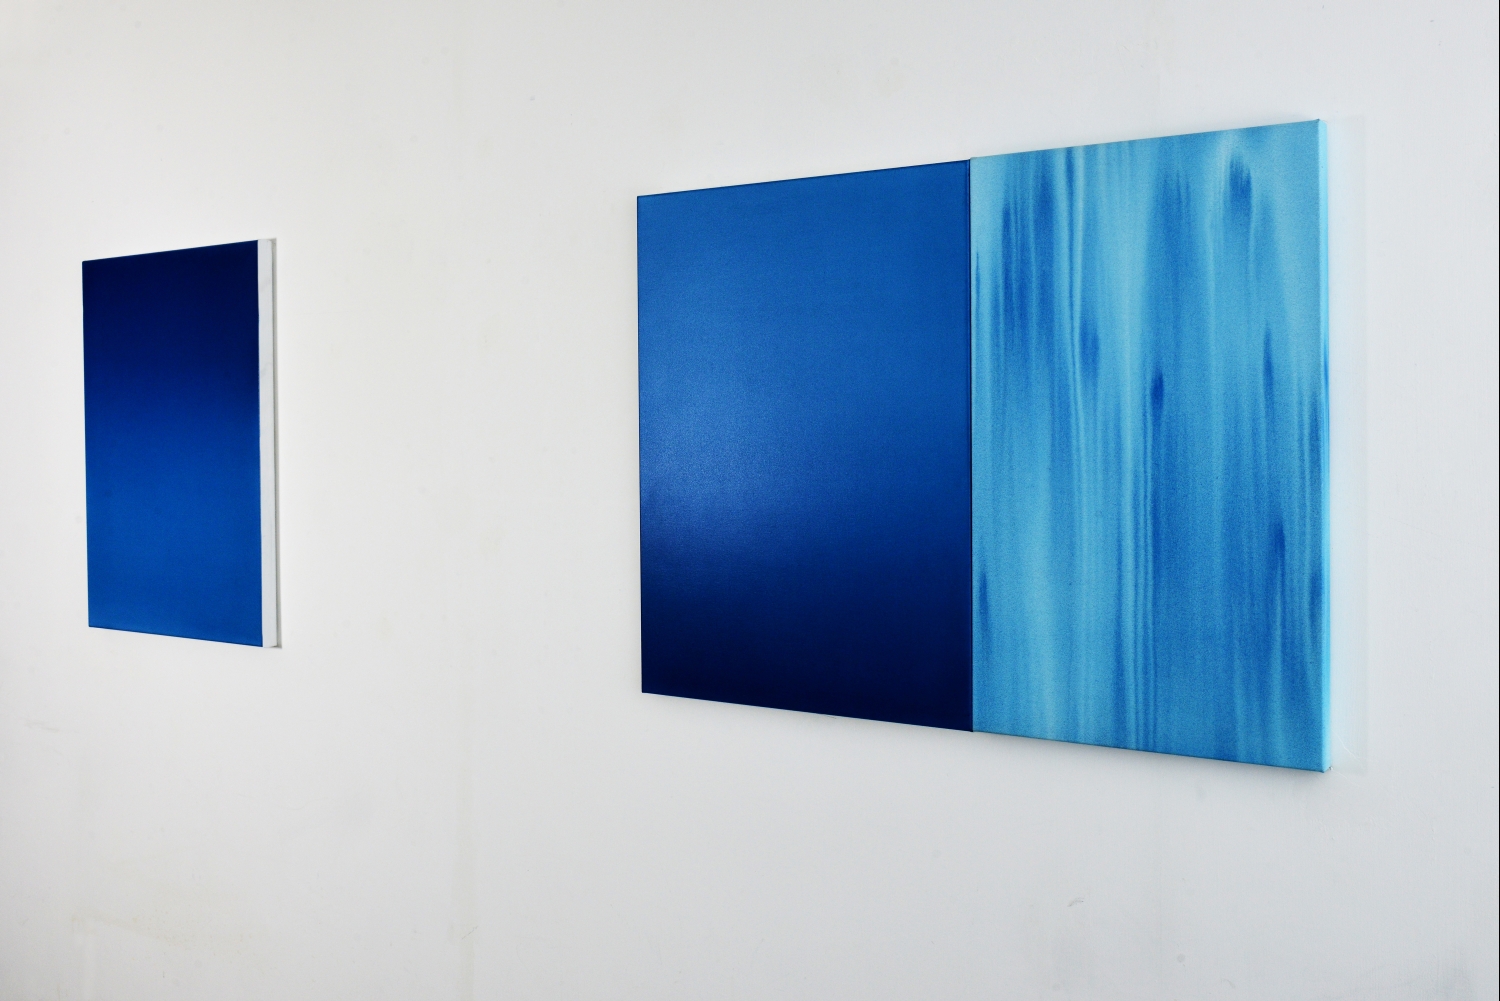  L to R:  Wu-Wei  i 2017 56cm x 76cm acrylic on primed polyester;  Stasis  Diptych 2017 102cm x 77cm. Photography by Tony Sze, Hong Kong. 